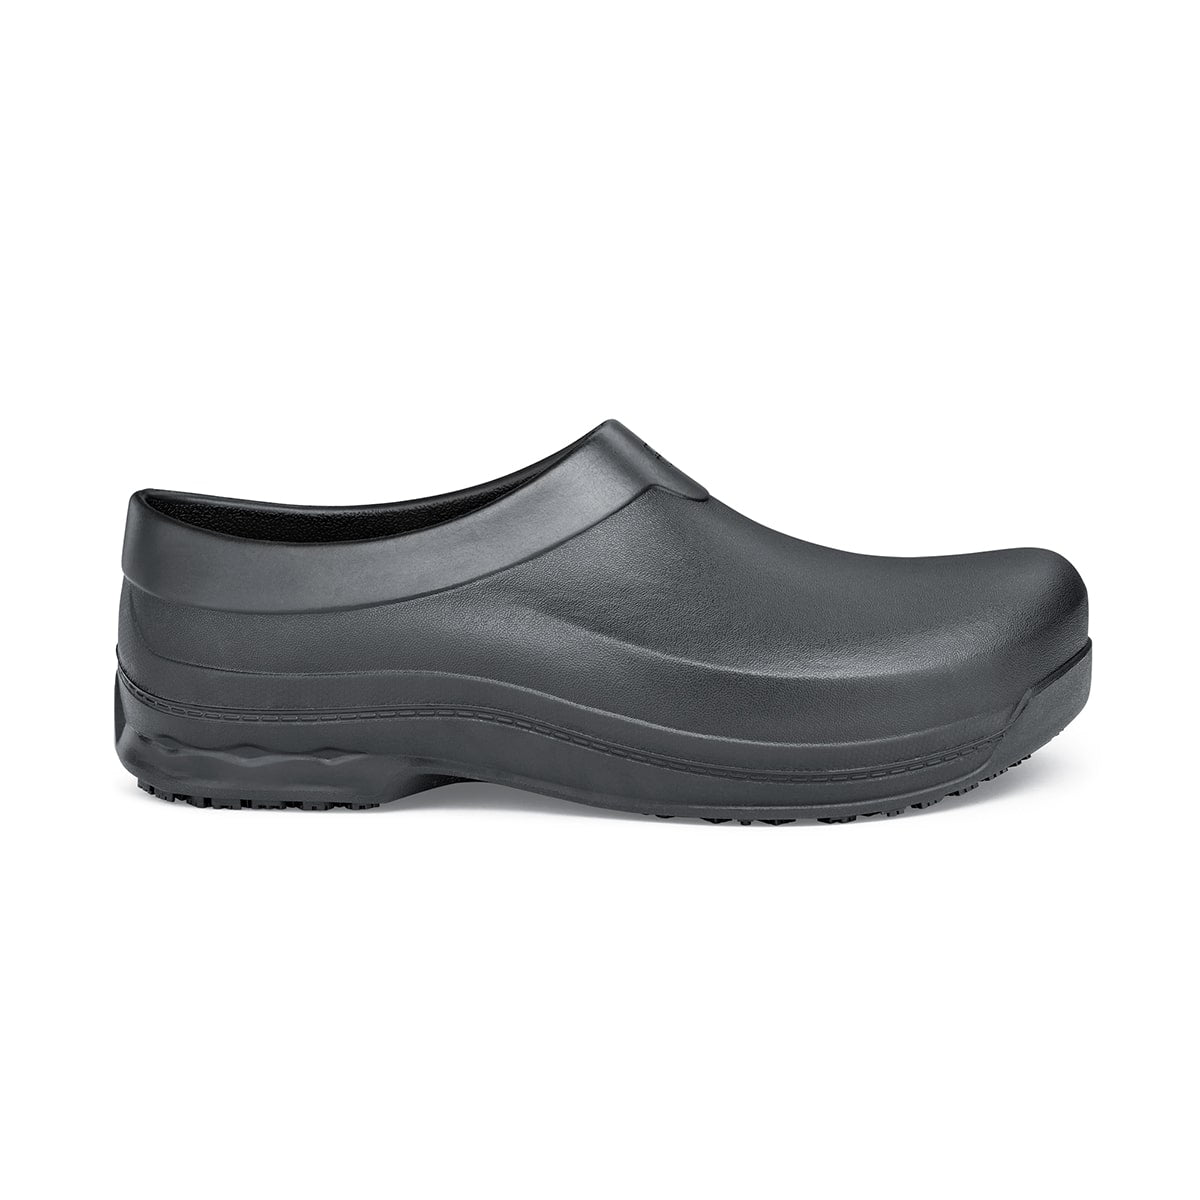 The Radium from Shoes For Crews are slip-on, slip-resistant shoes designed to provide comfort throughout the day, seen from the right.